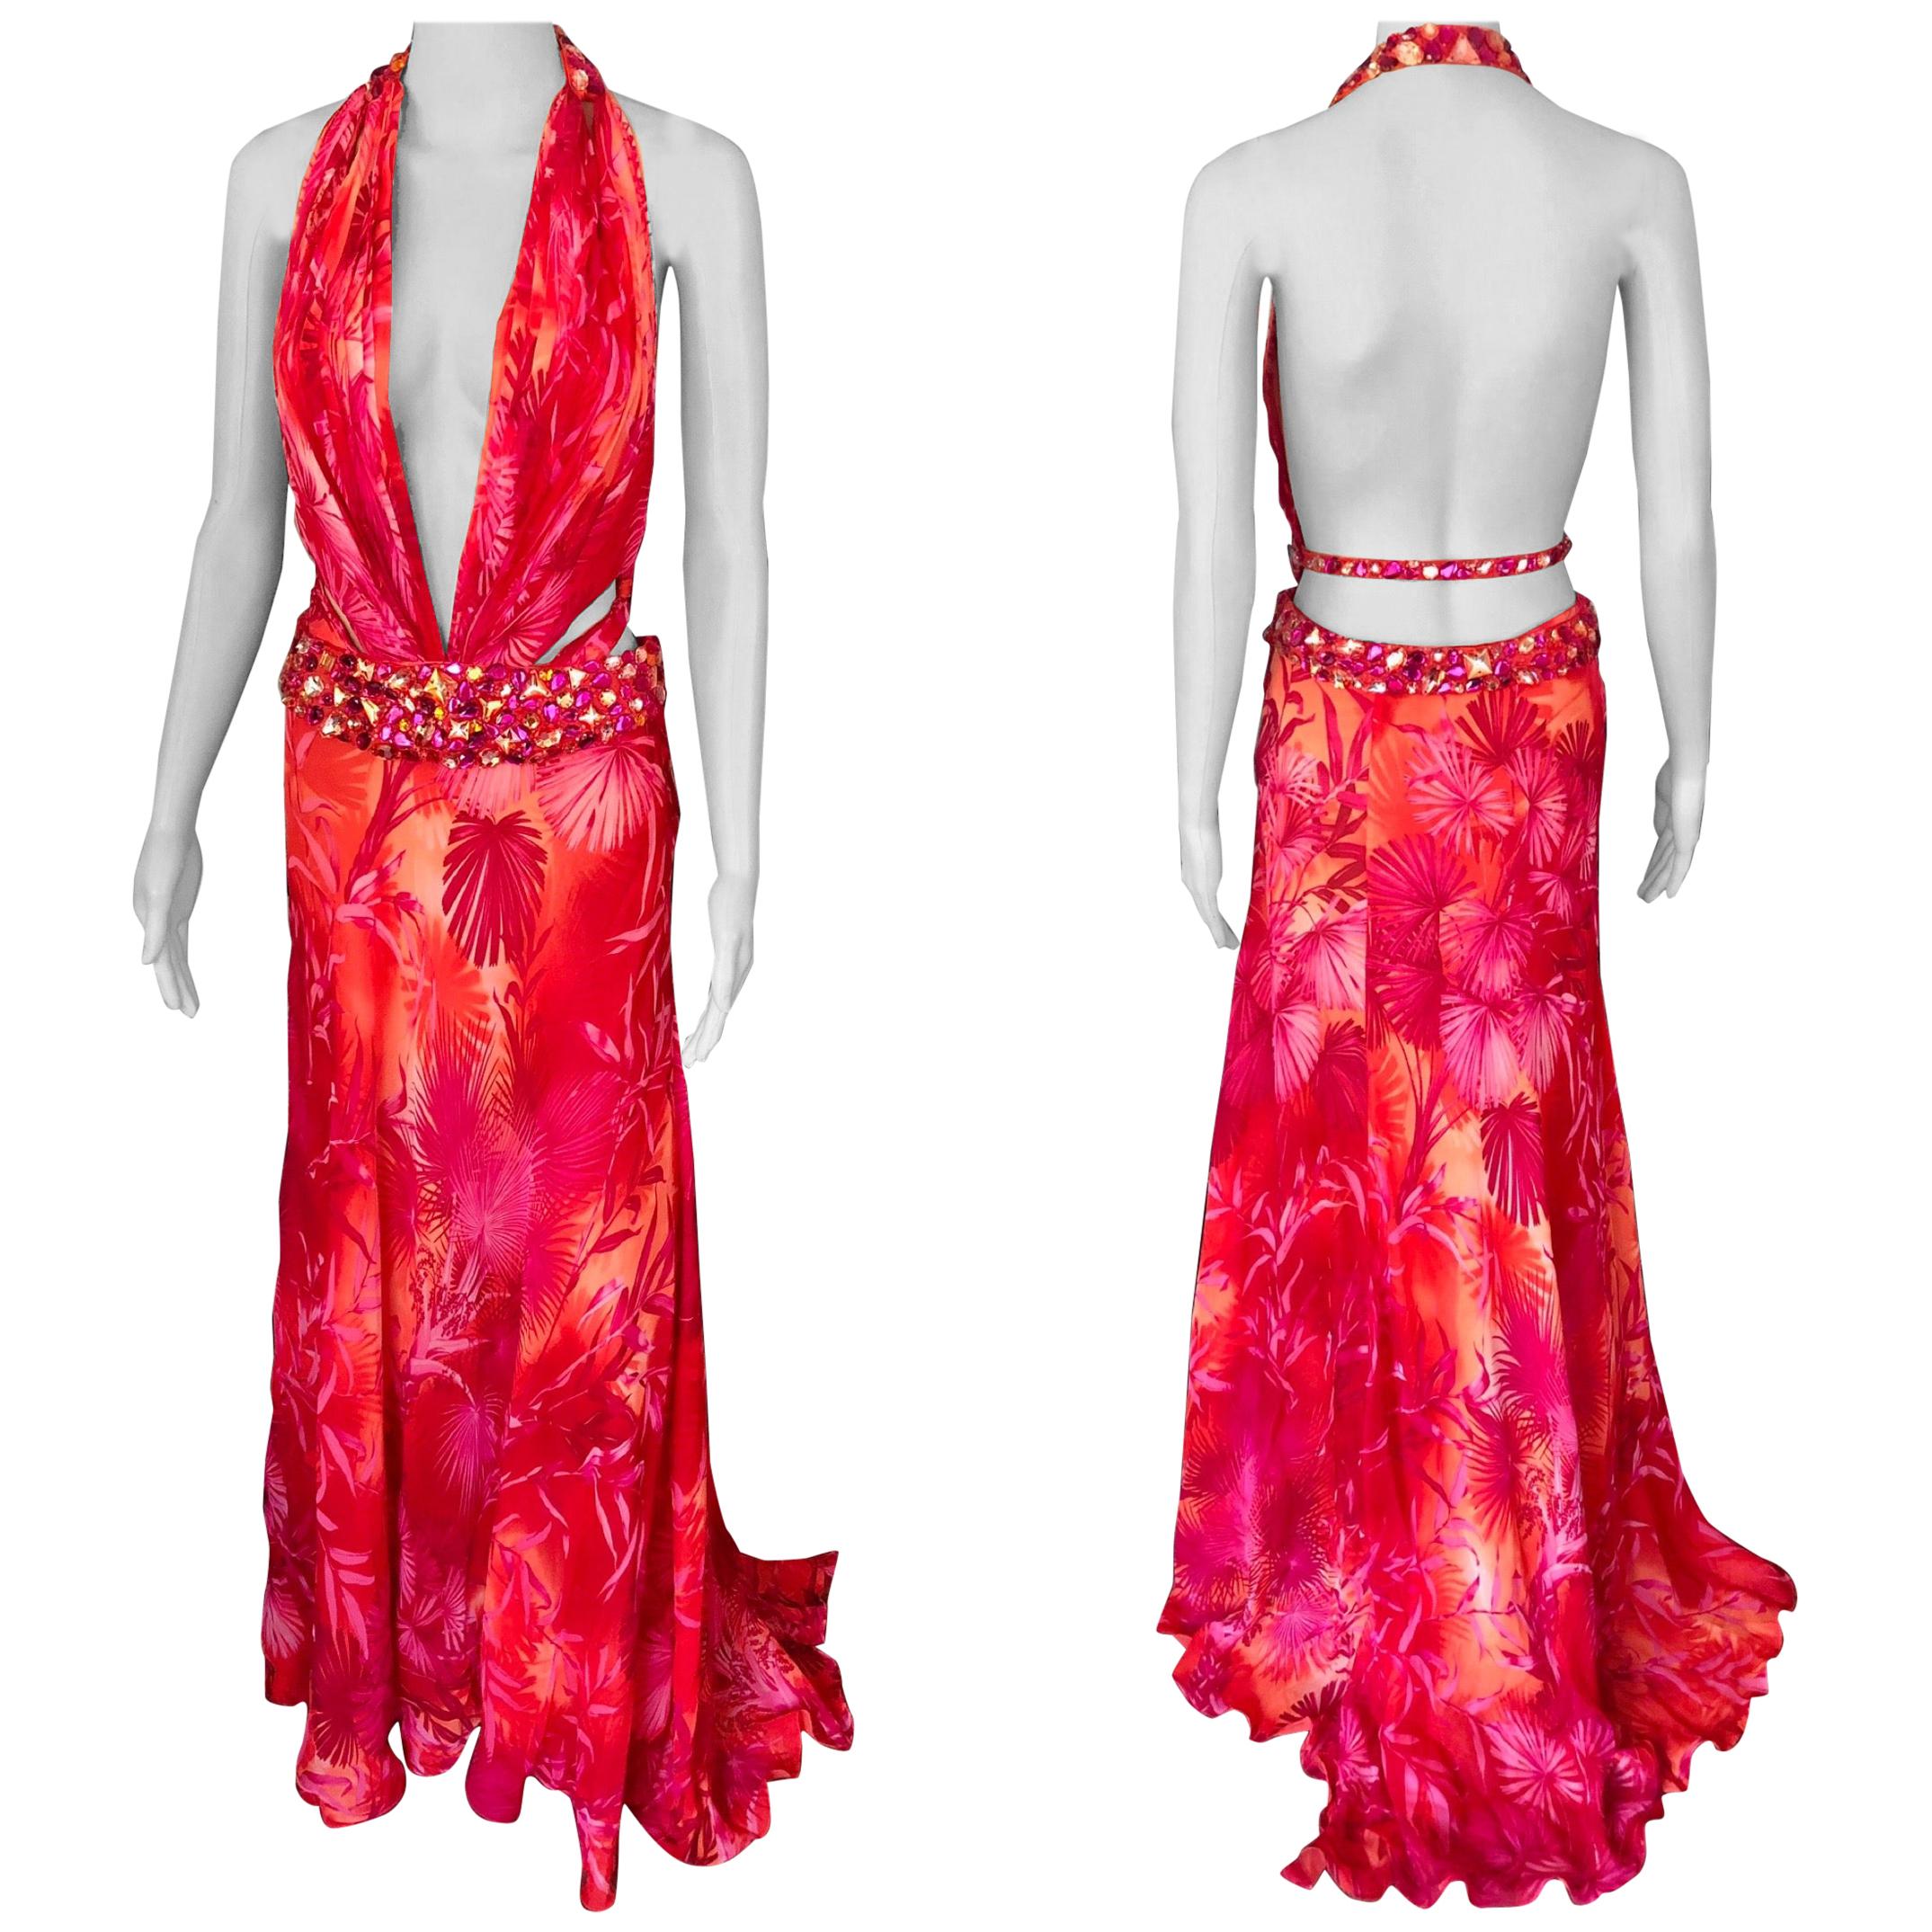 F/W 2000 Vintage Gianni Versace Couture Pink Silk Lace Gown w/ Crystal ...